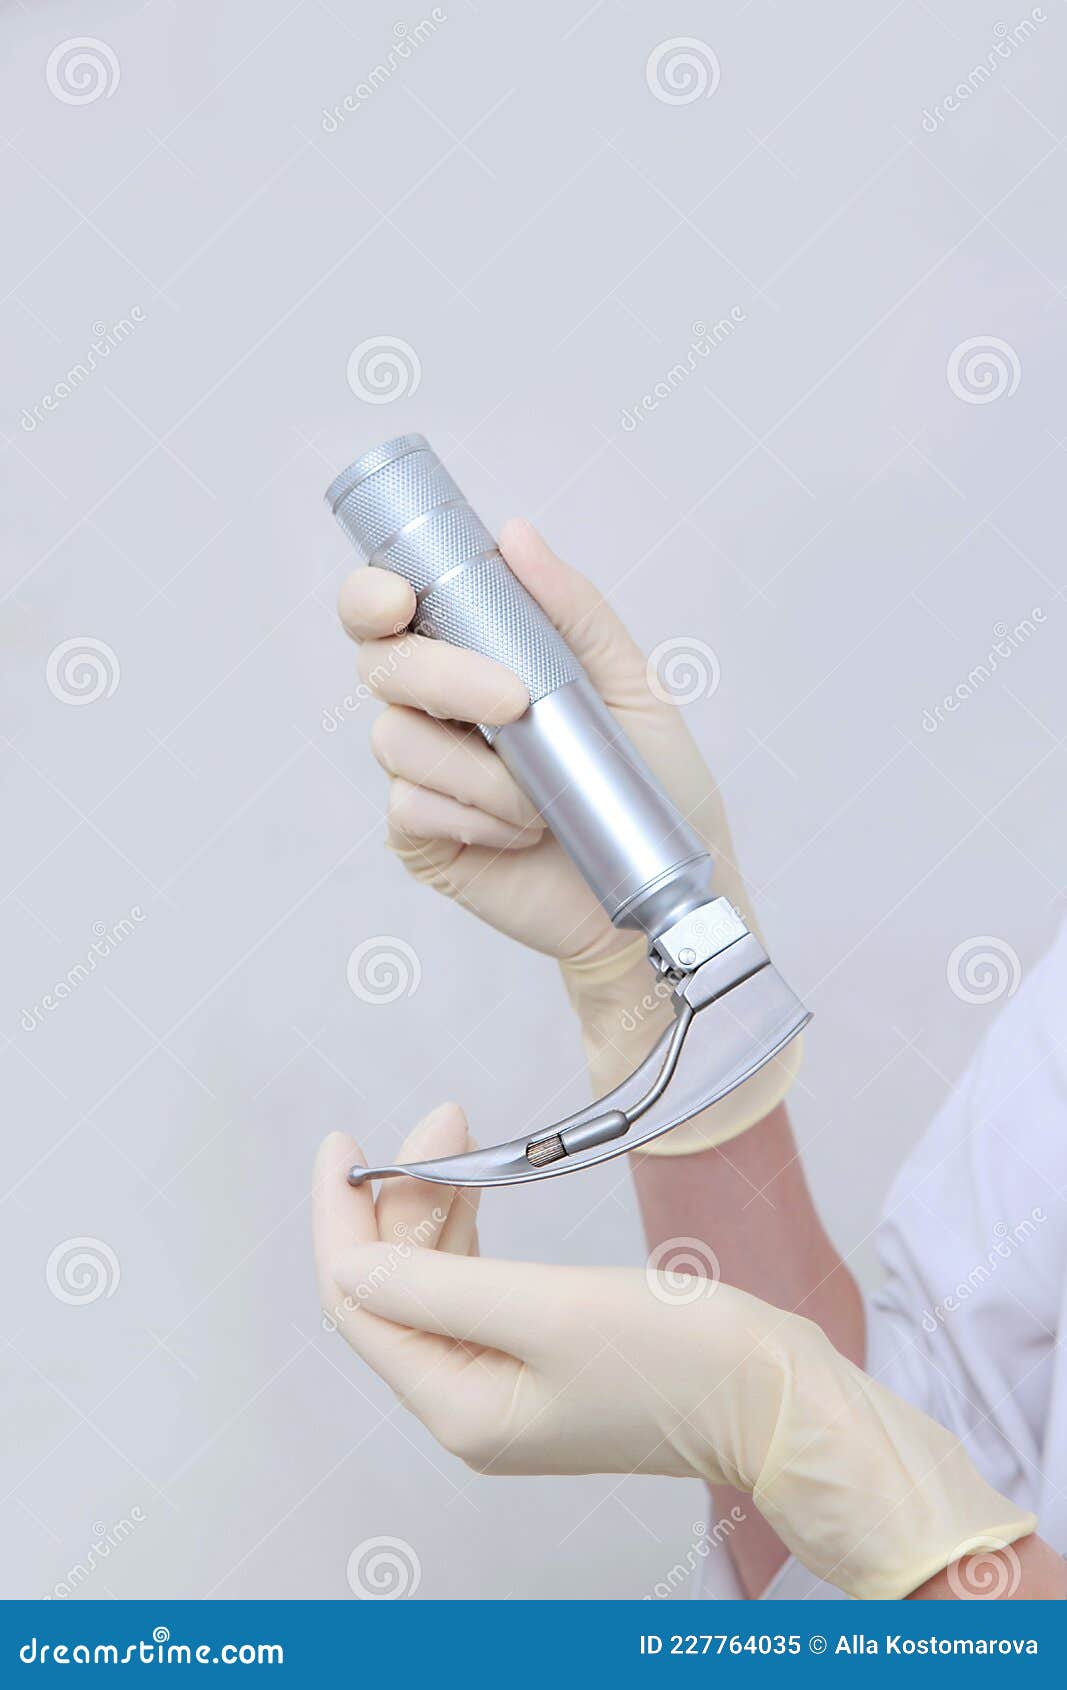 apparatus for tracheal intubation in hands of an anesthesiologist, resuscitator. hands in protective gloves. preparation